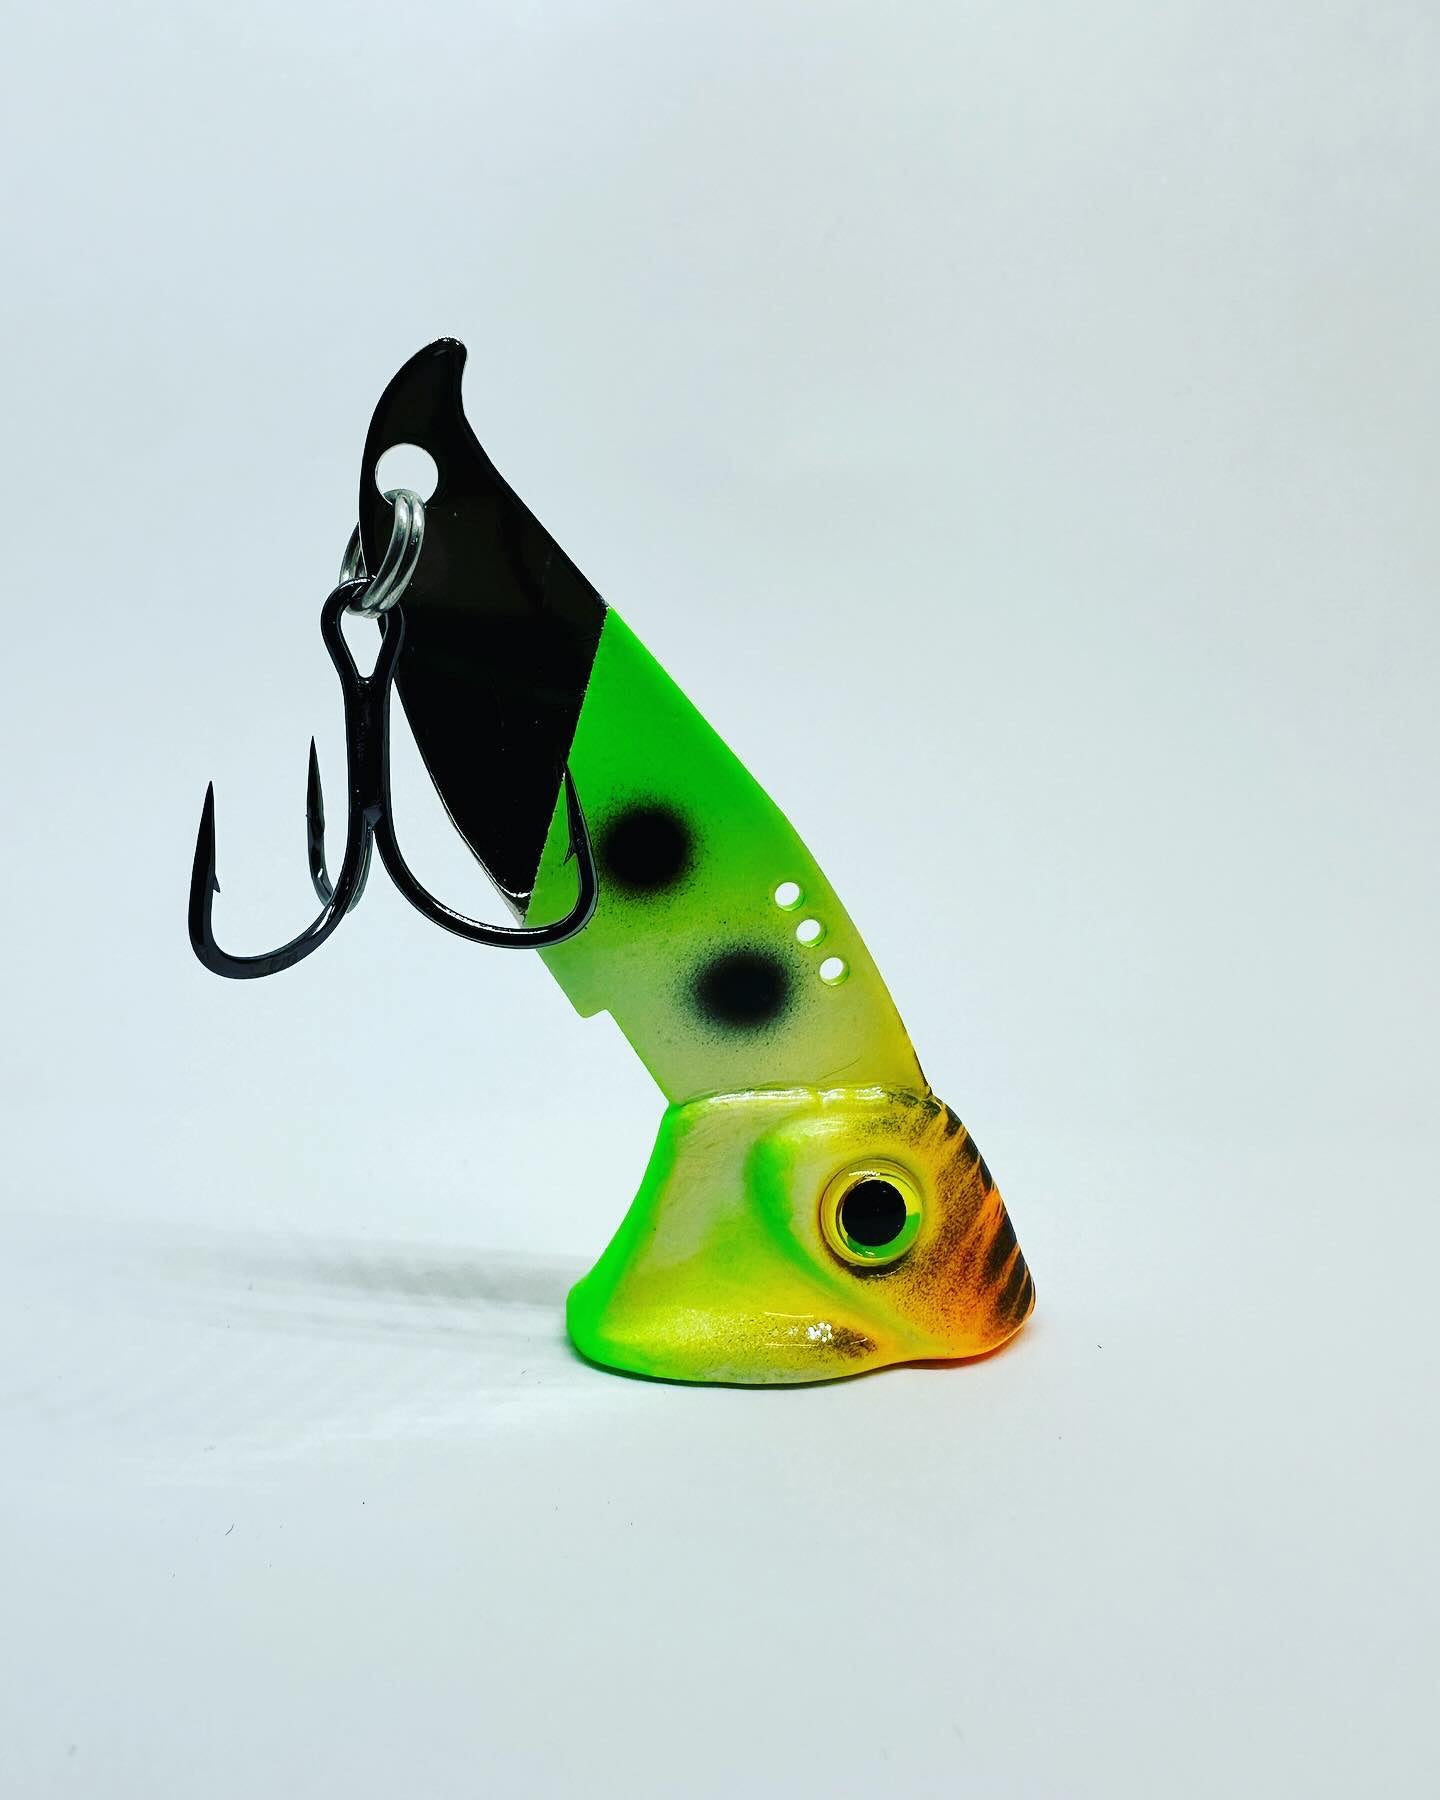 Vertical Minnow Blade Bait - Electric Eel Glow by Vertical Jigs and Lures